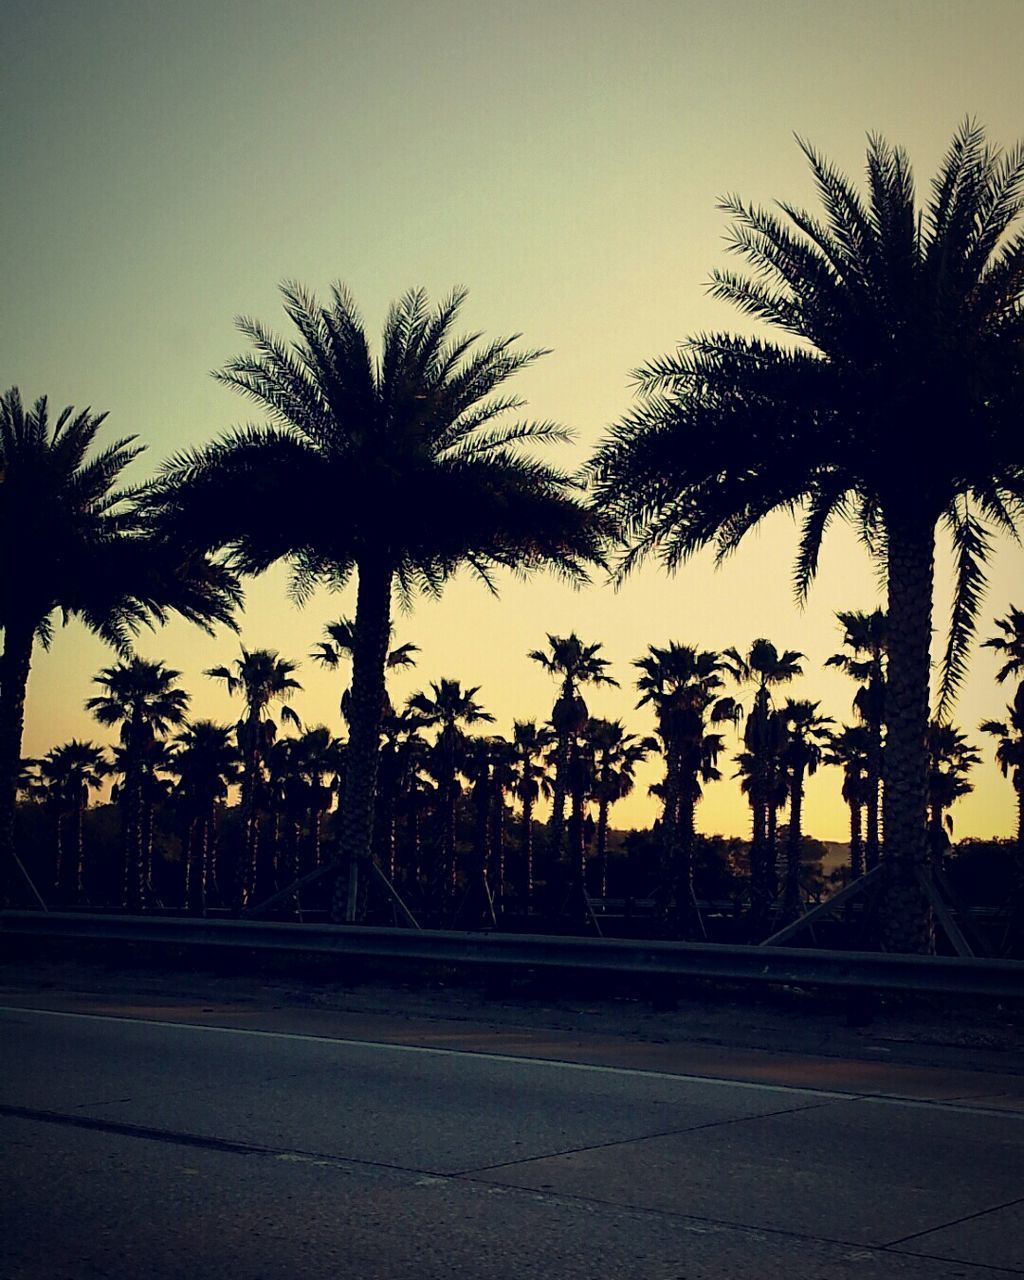 palm tree, tree, silhouette, sunset, sky, clear sky, road, tranquility, tree trunk, growth, nature, tranquil scene, street, scenics, no people, outdoors, the way forward, dusk, copy space, beauty in nature